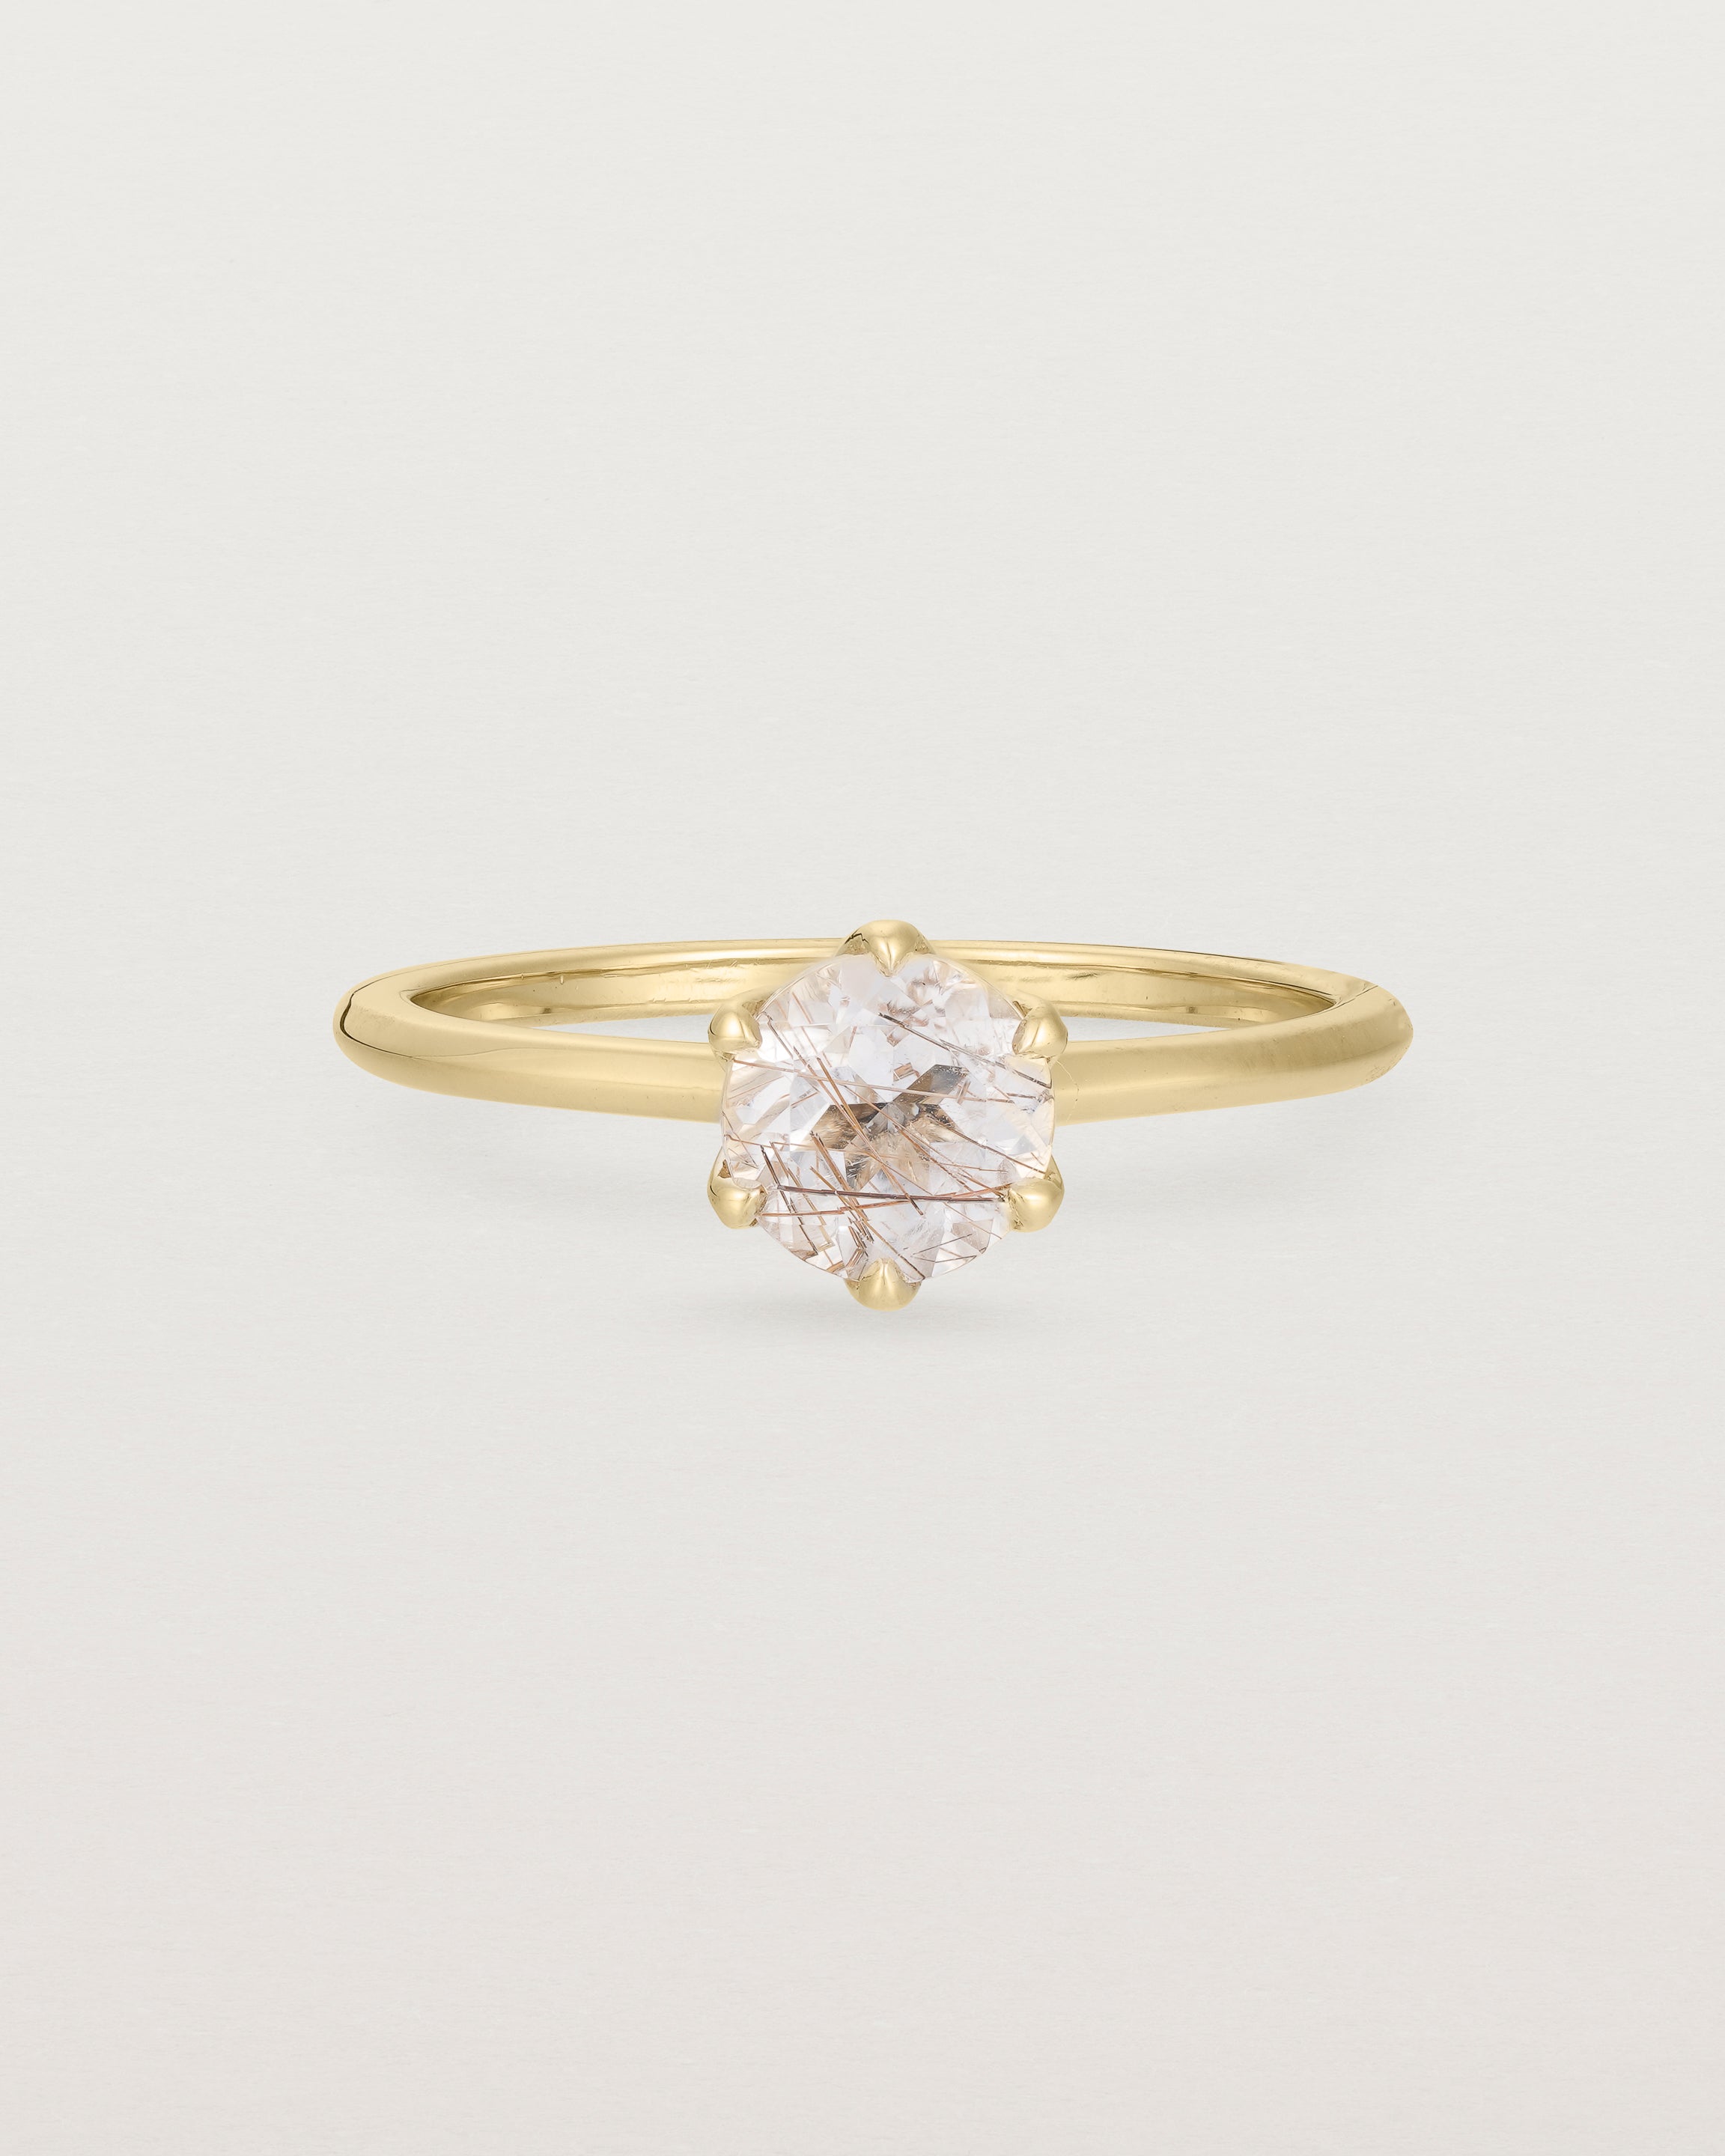 Front view of the Mandala Solitaire Ring | Rutilated Quartz & Diamonds | Yellow Gold.